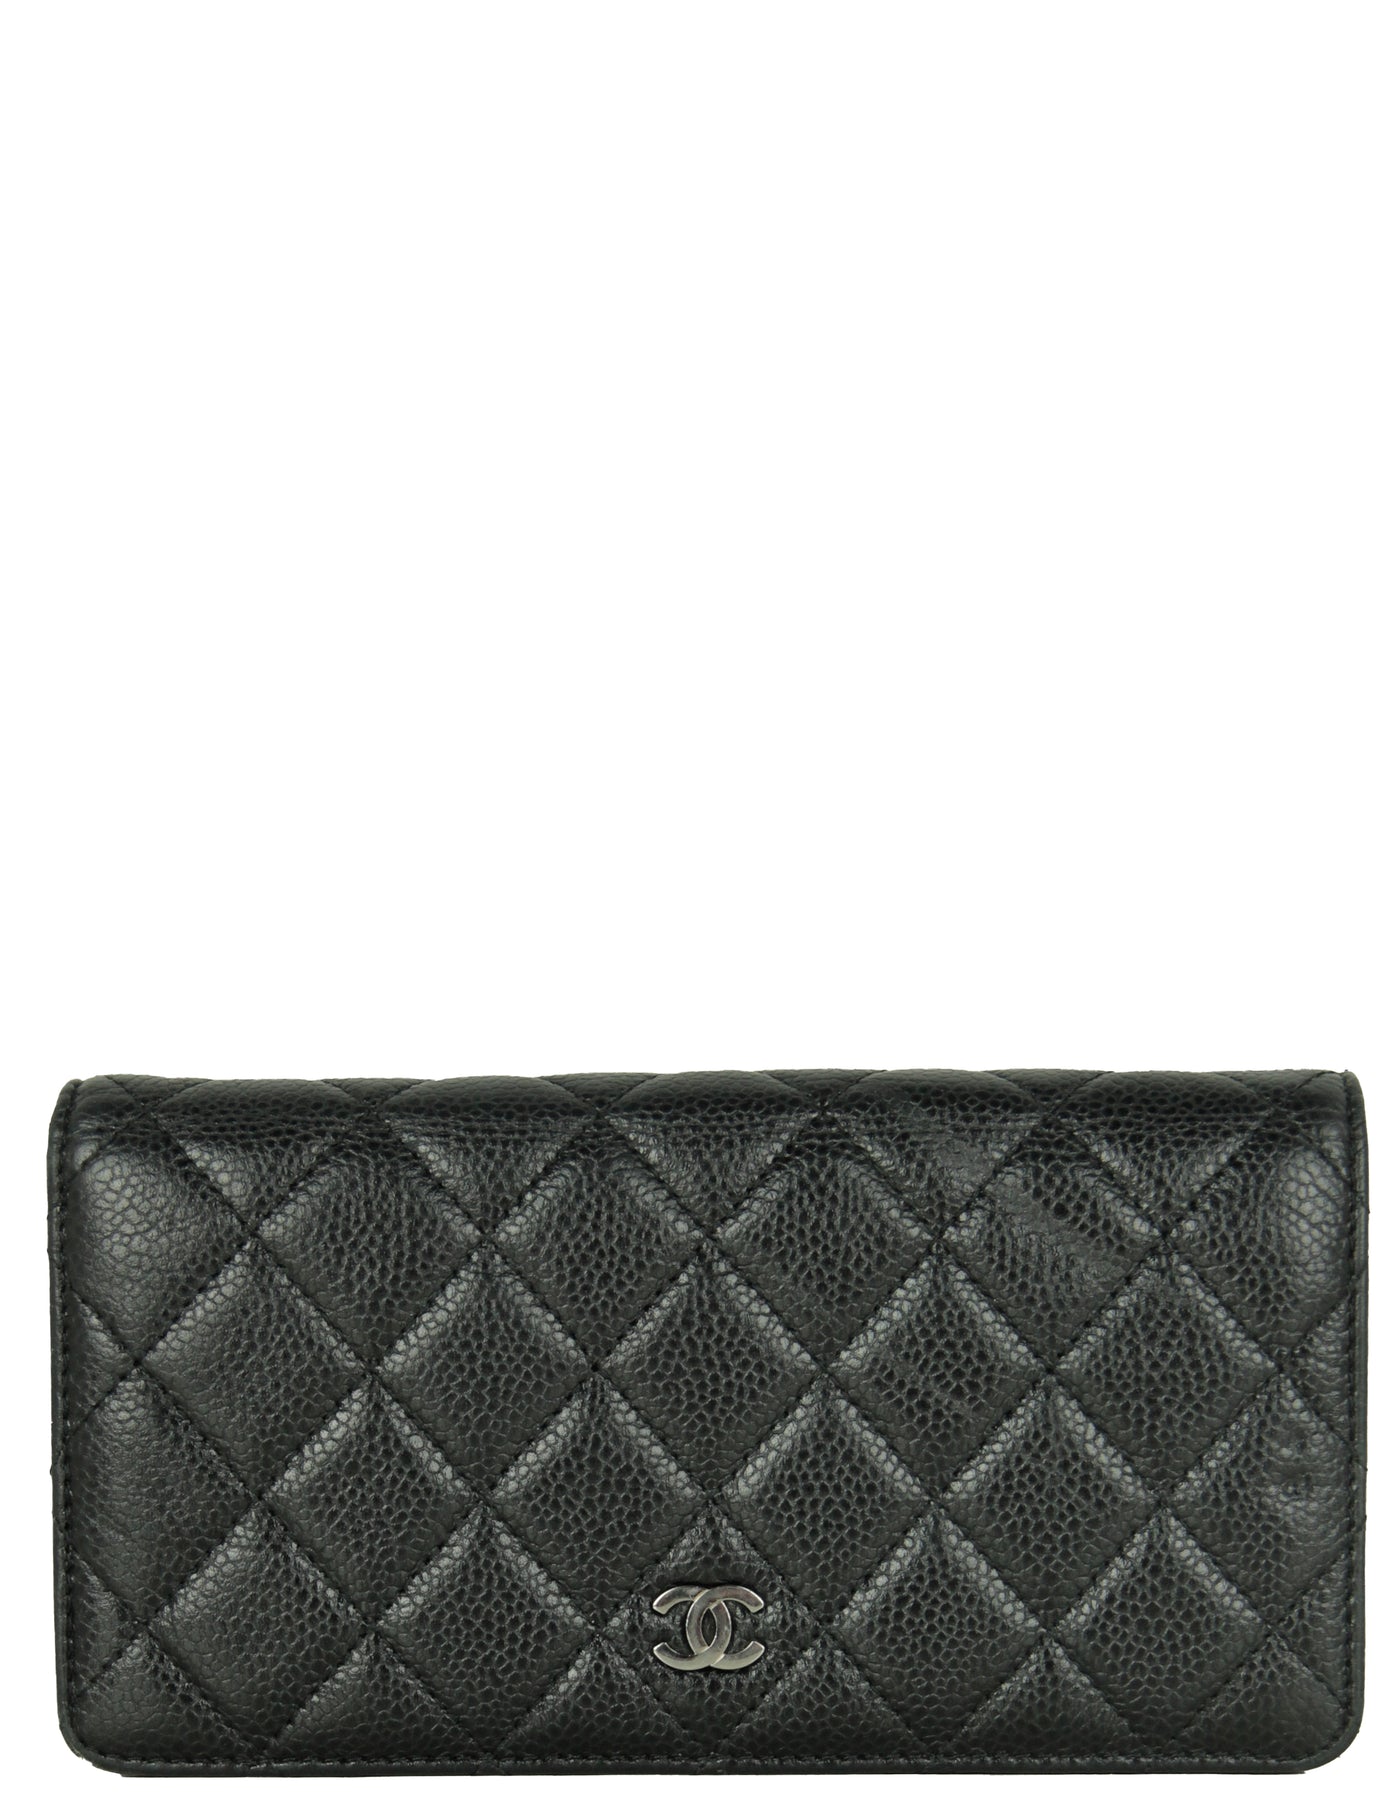 Chanel Black Caviar Leather Quilted Yen Wallet – ASC Resale